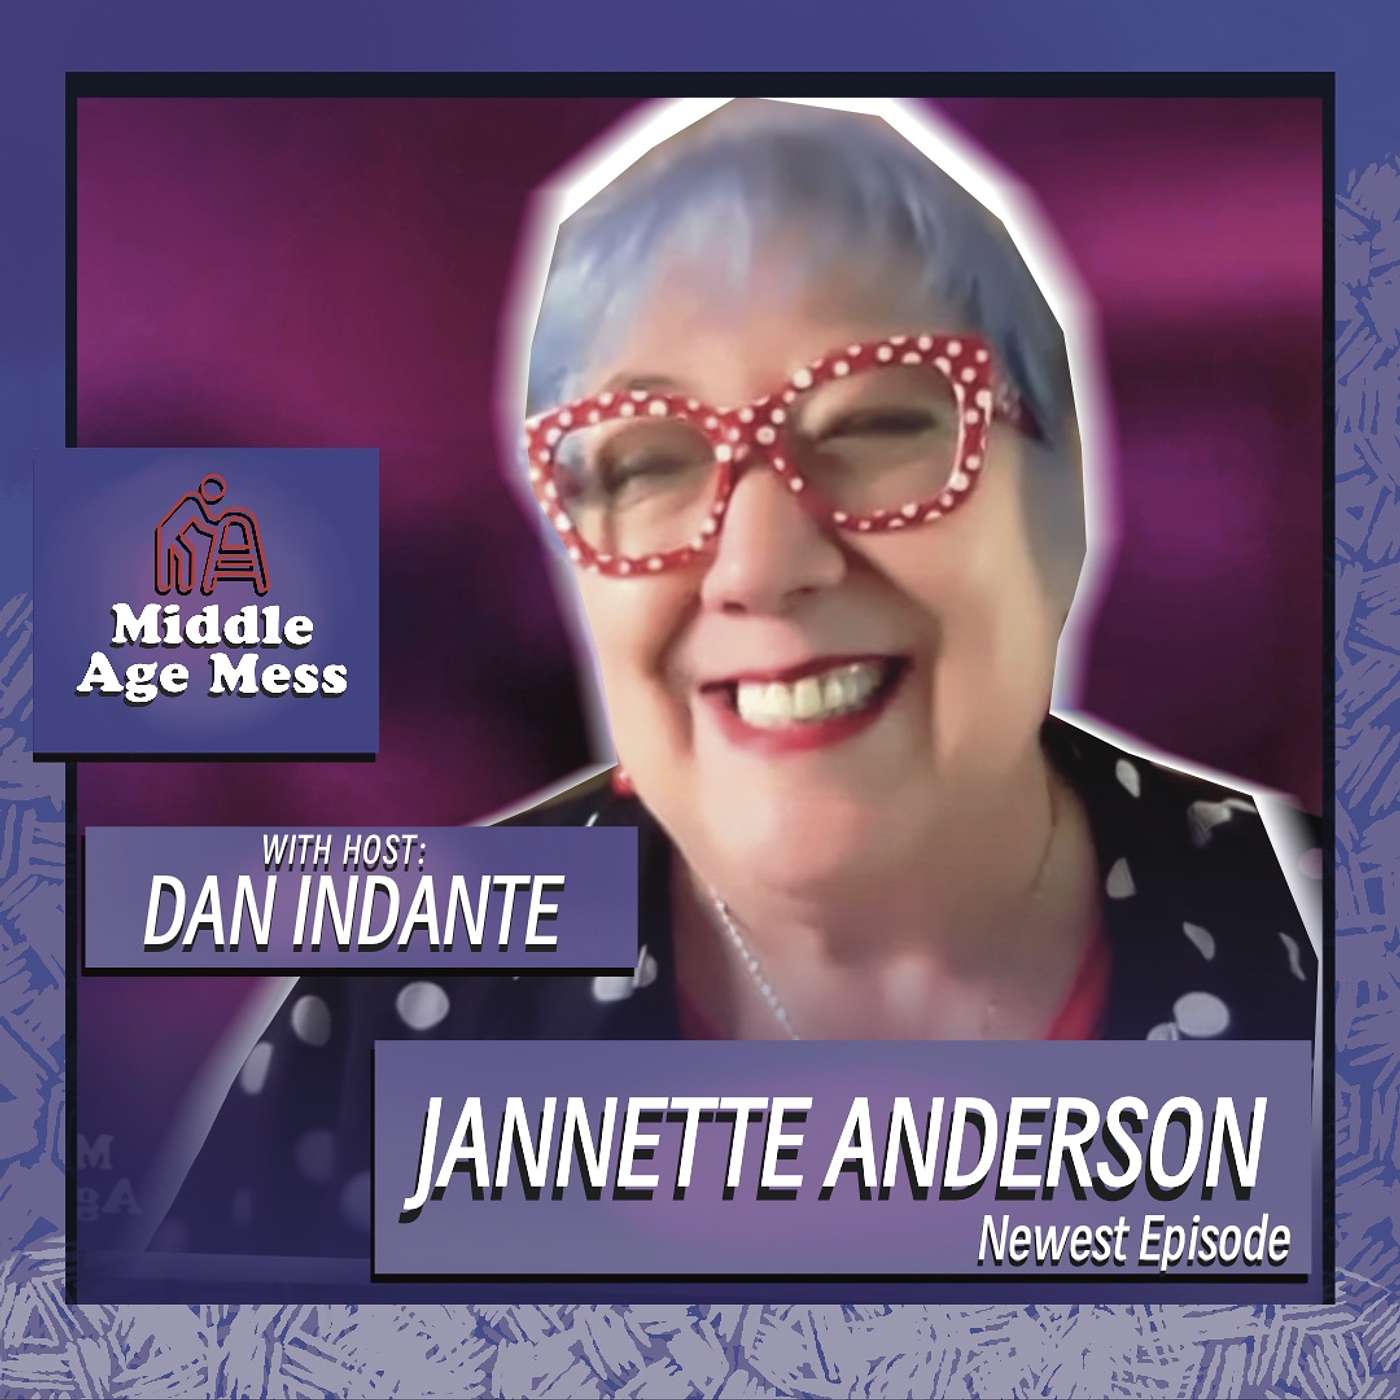 Middle Age Mess, Episode 10 - Jannette Anderson